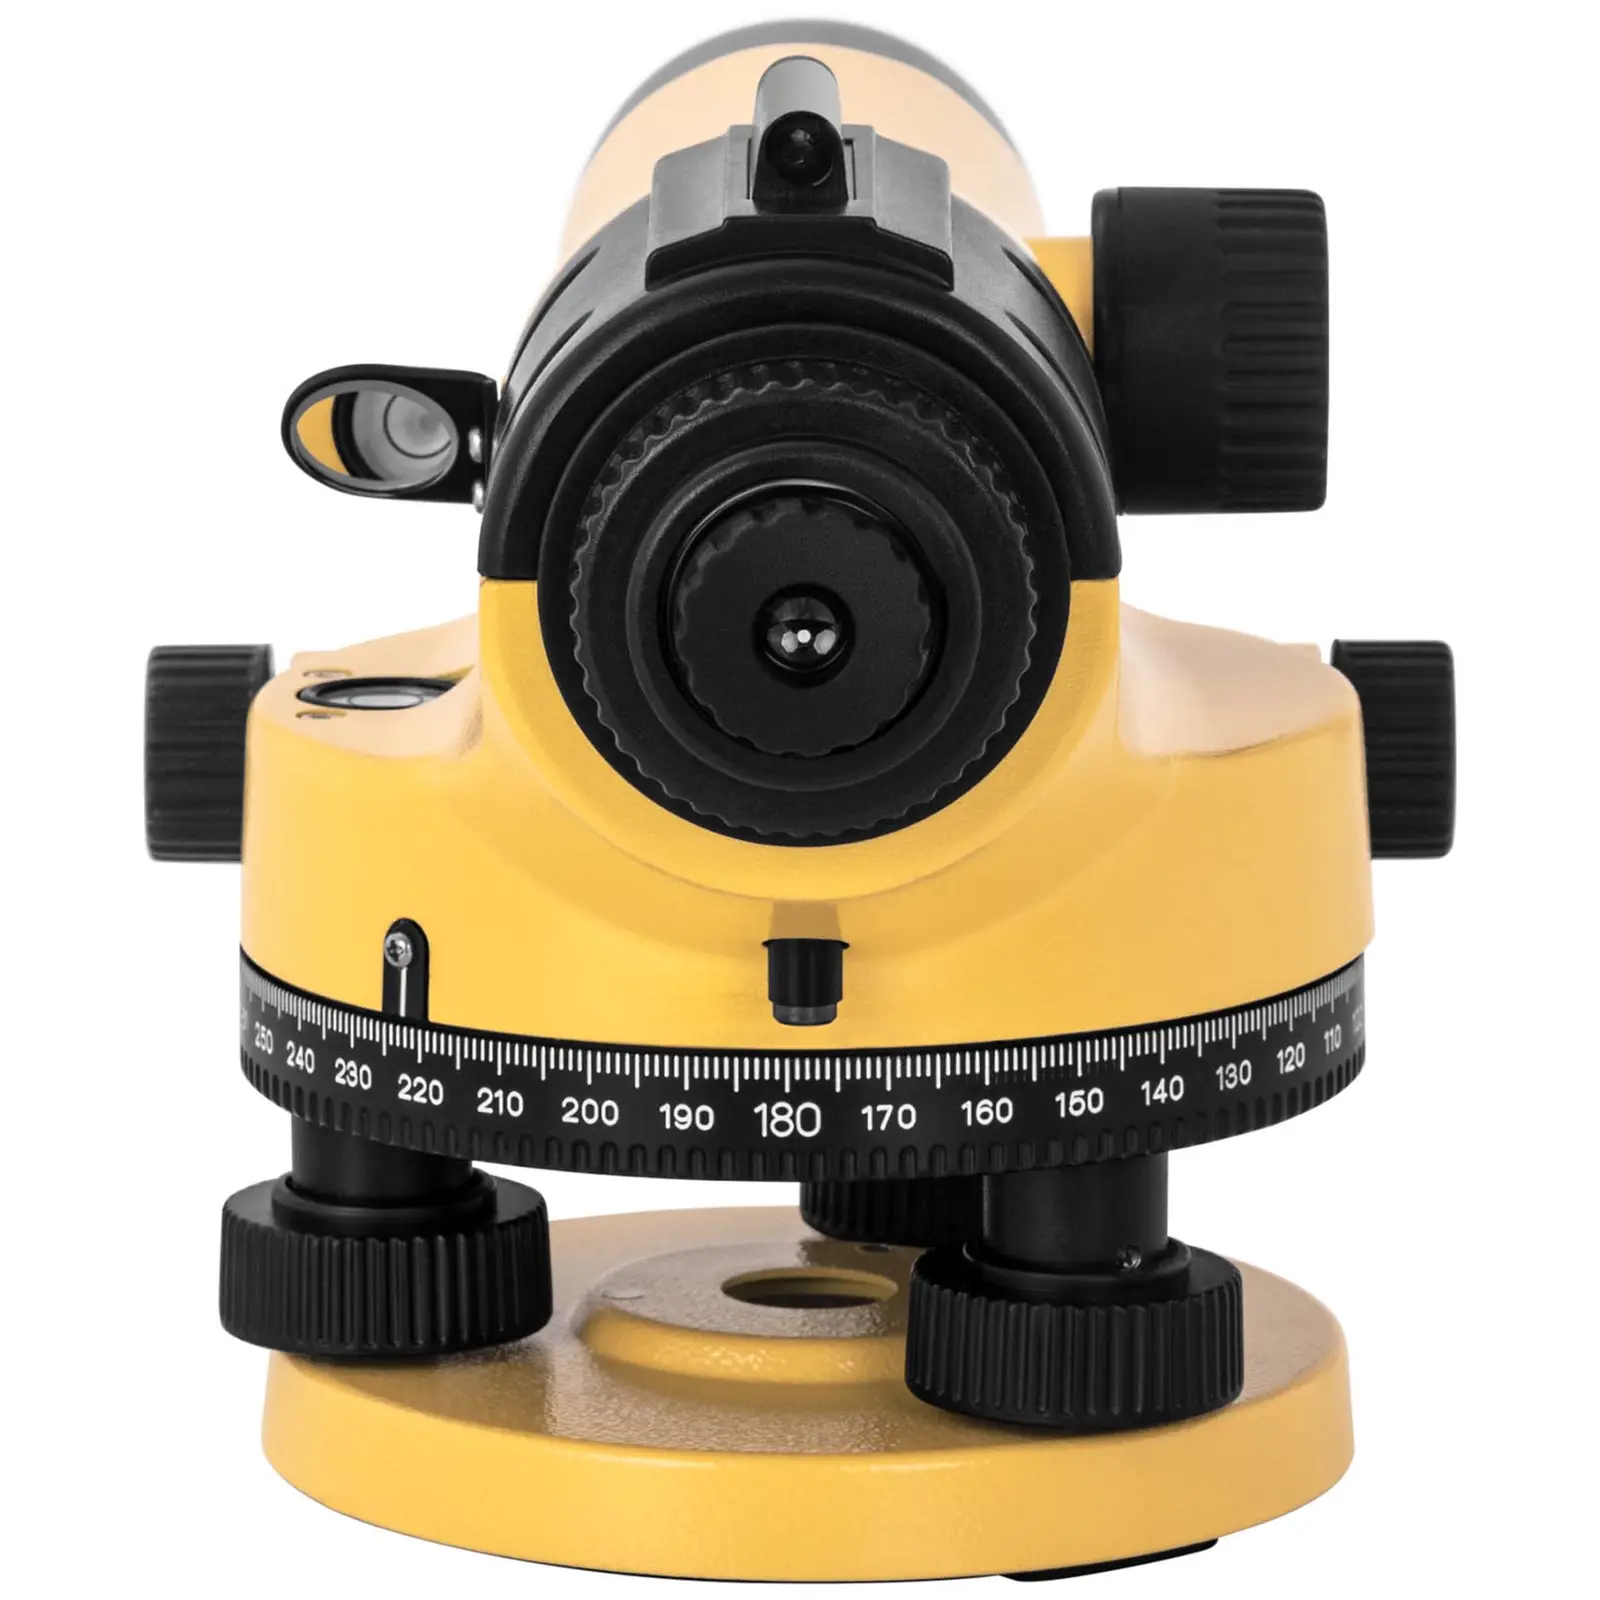 Automatic Level - with tripod and level staff - 28x magnification - 36 mm lens - deviation 1.5 mm - magnetic compensator